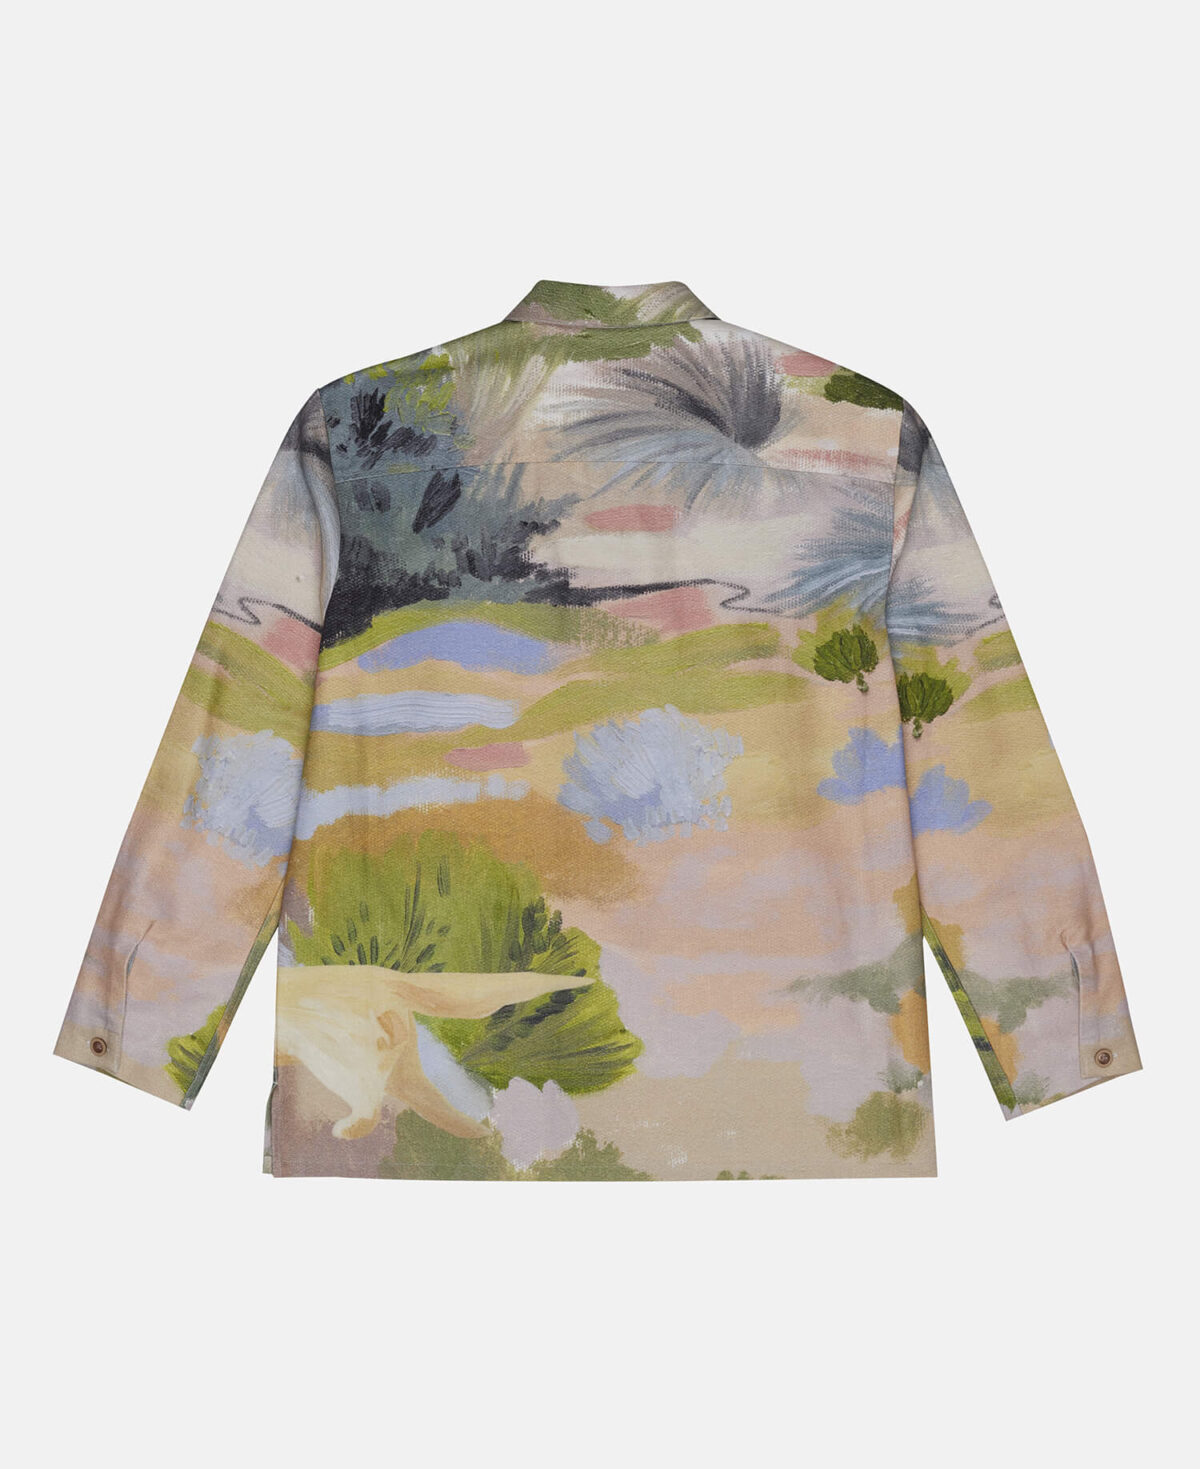 BİL'S x ECEM YÜKSEL "A LITTLE VIEW FROM A HIKING DAY" UNISEX OVERSHIRT